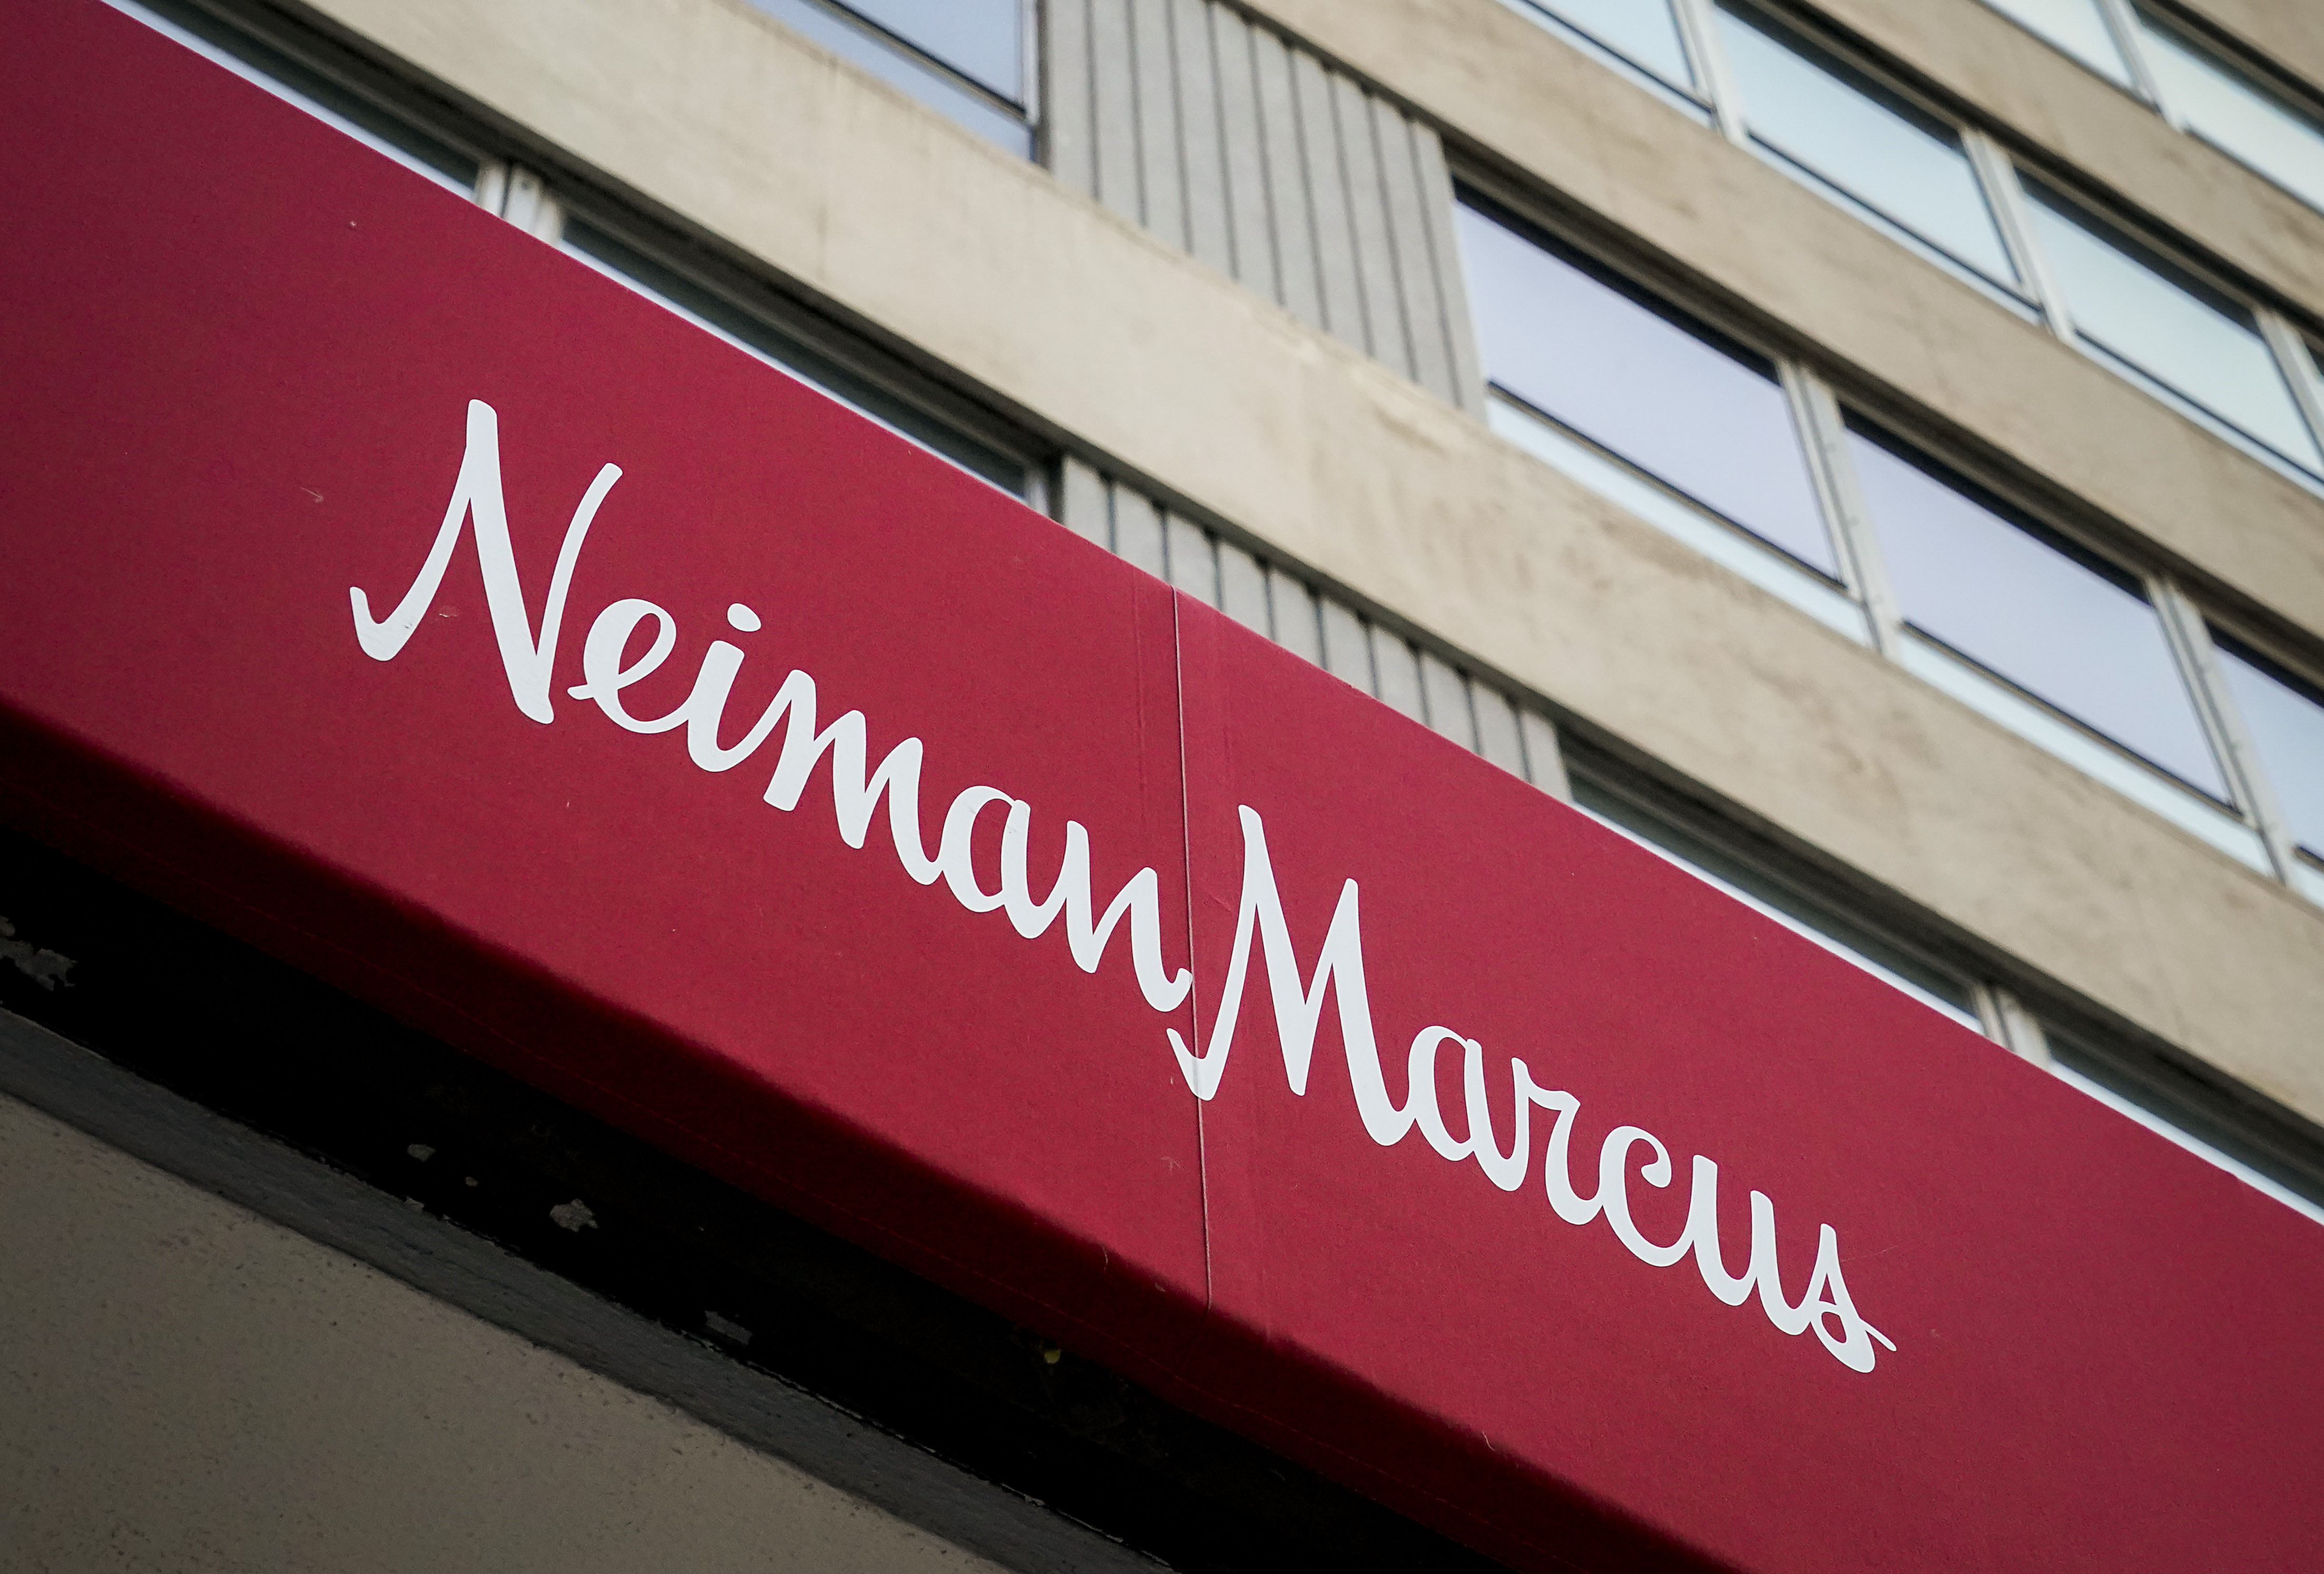 Neiman Marcus adopts a flex payment idea from QVC and HSN so more